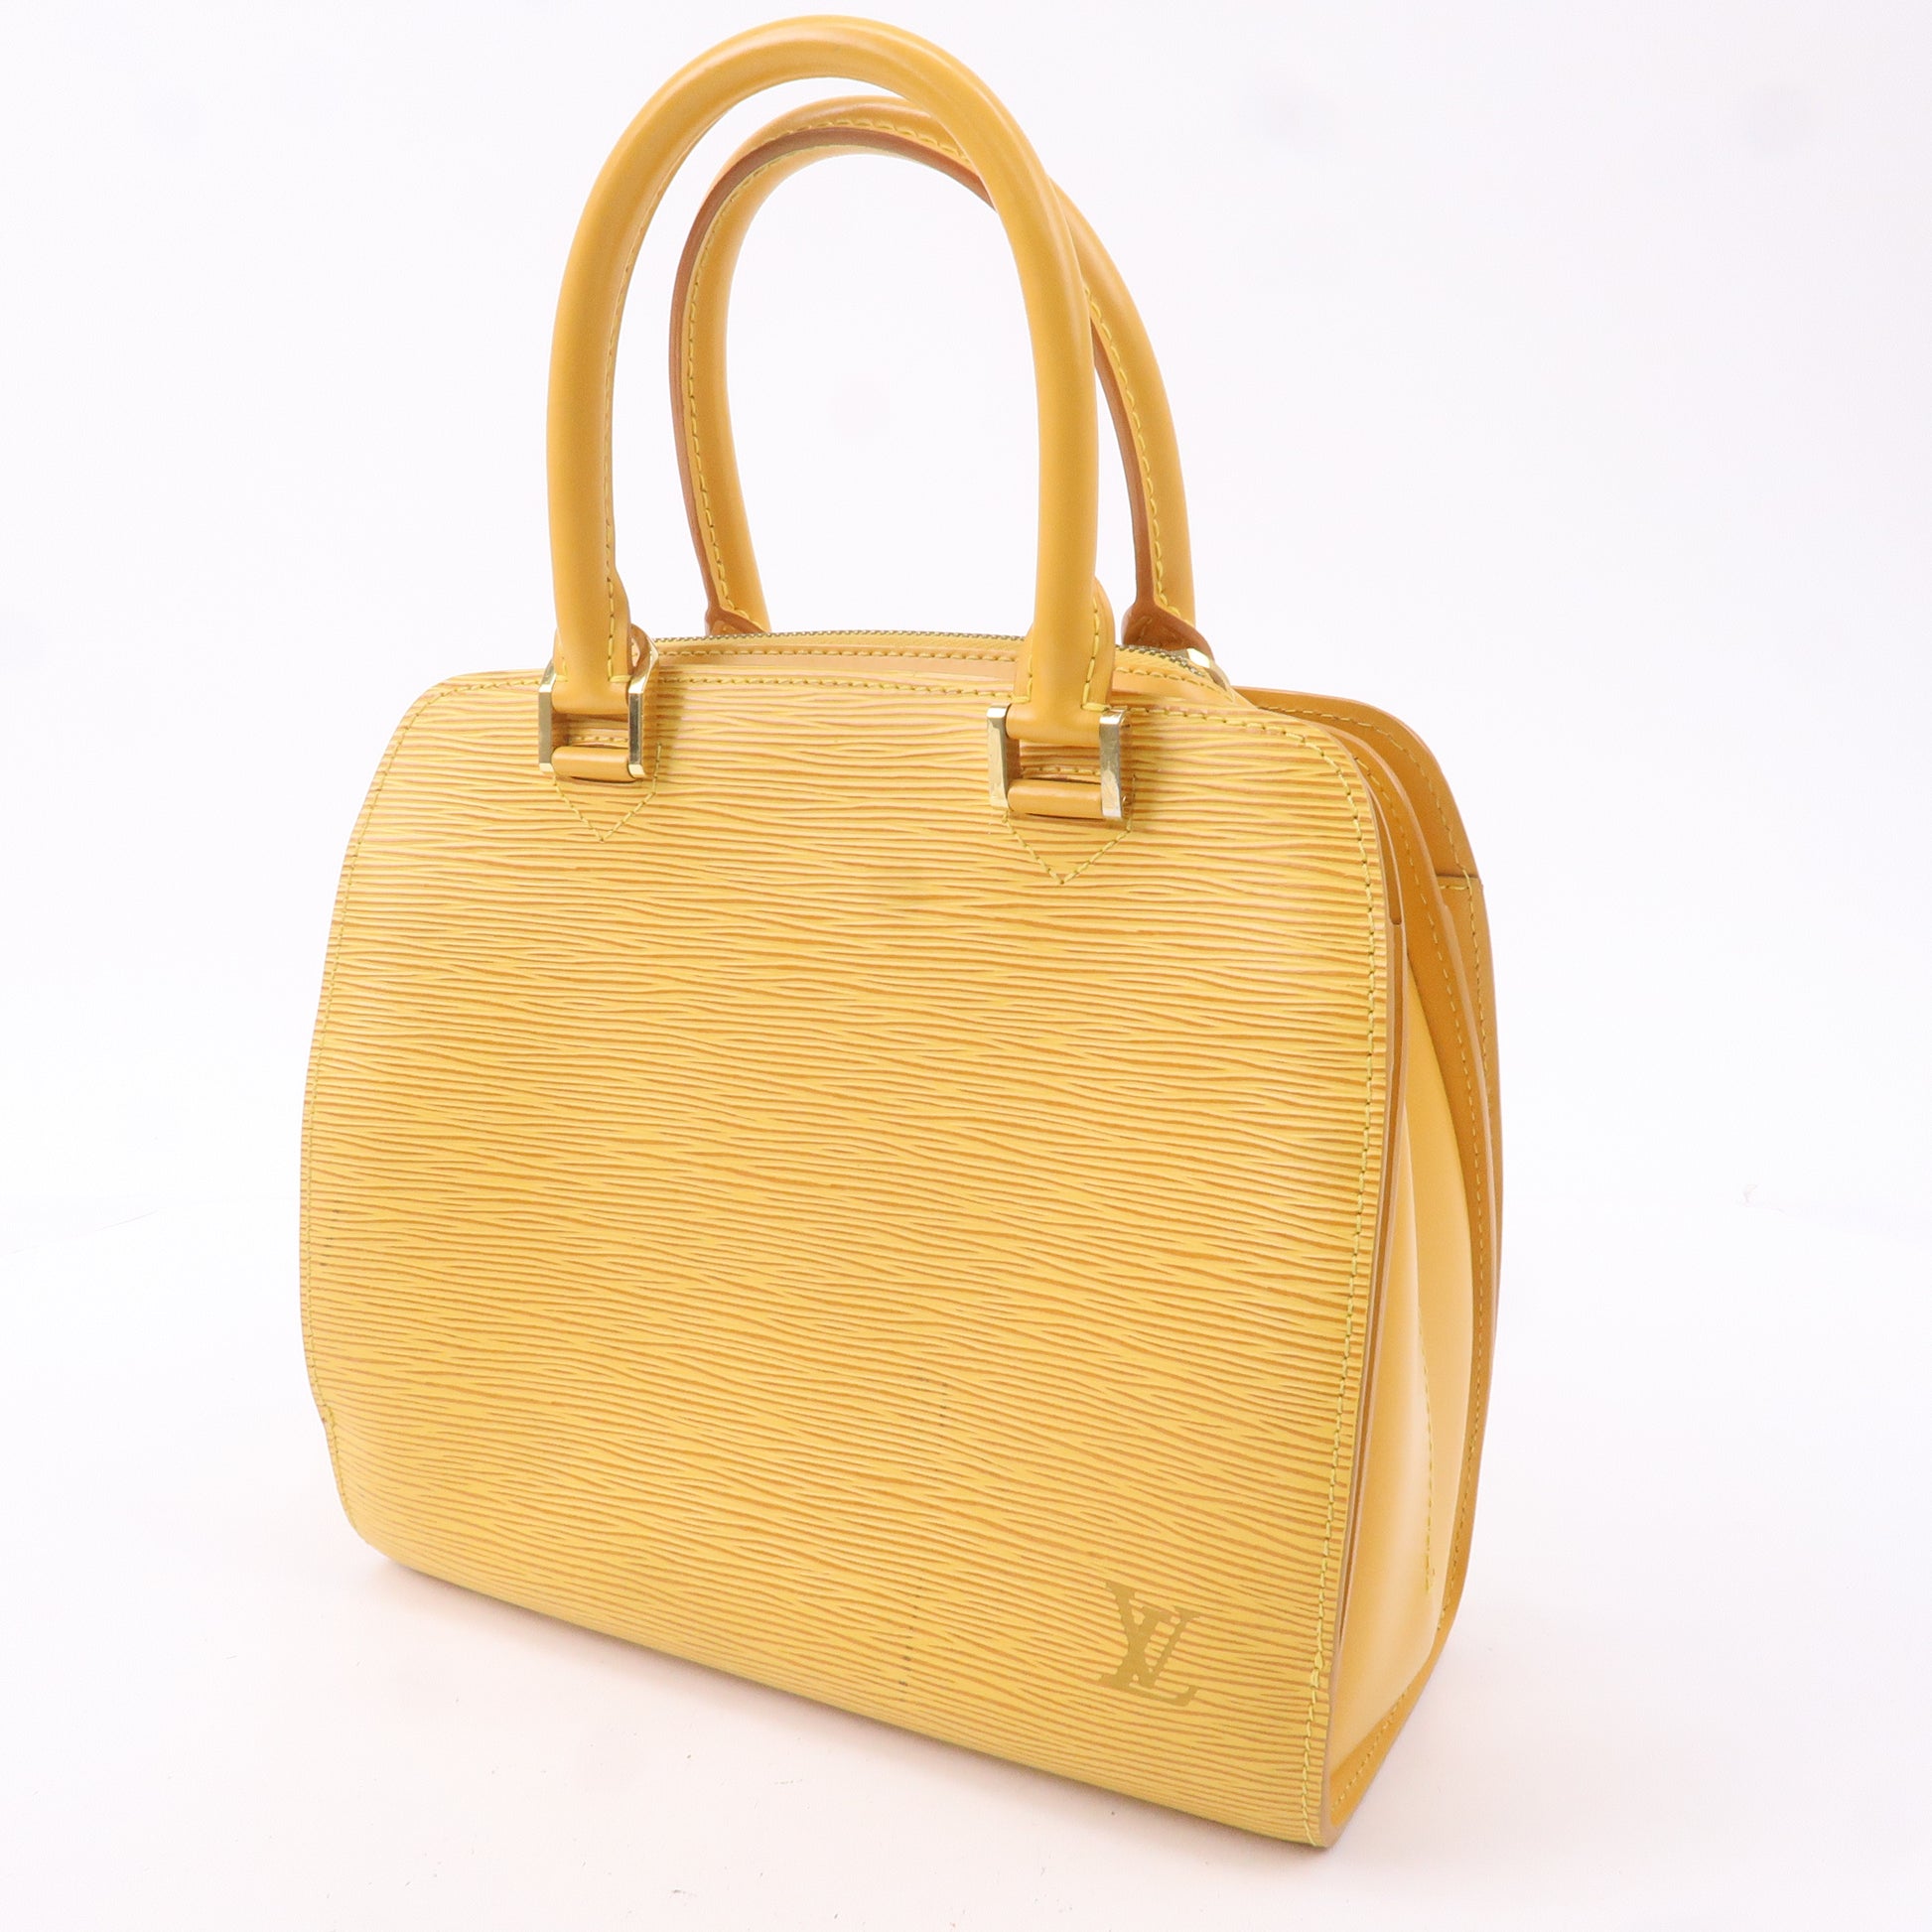 Buy Free Shipping Authentic Pre-owned Louis Vuitton Epi Tassili